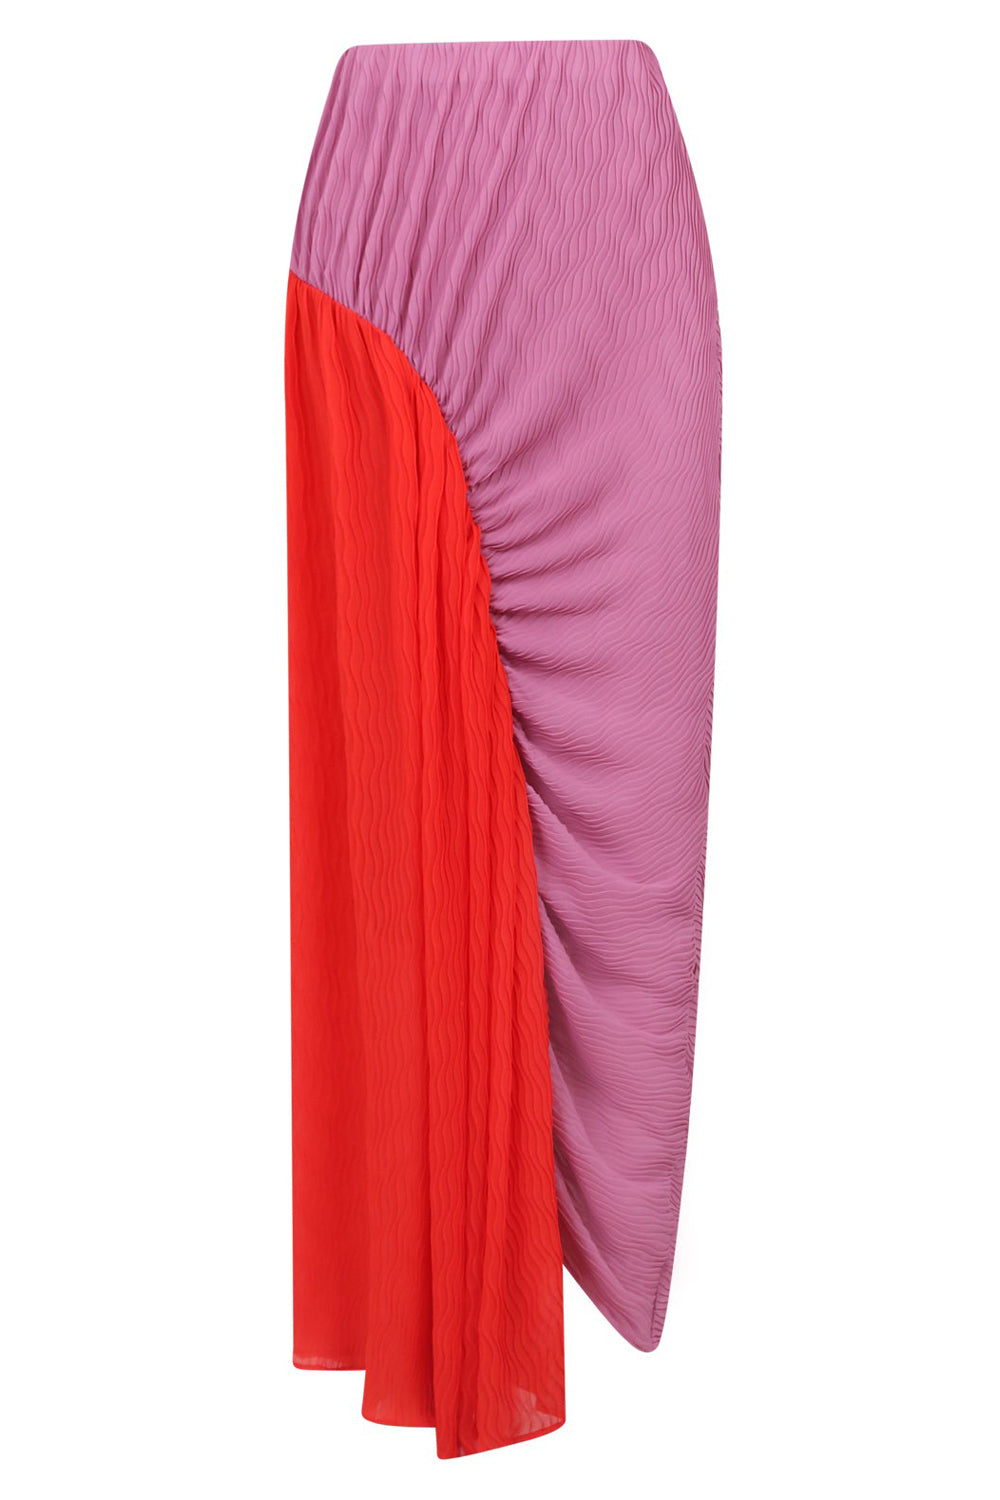 BROGGER RTW NOA RUCHED SKIRT | PINK/RED